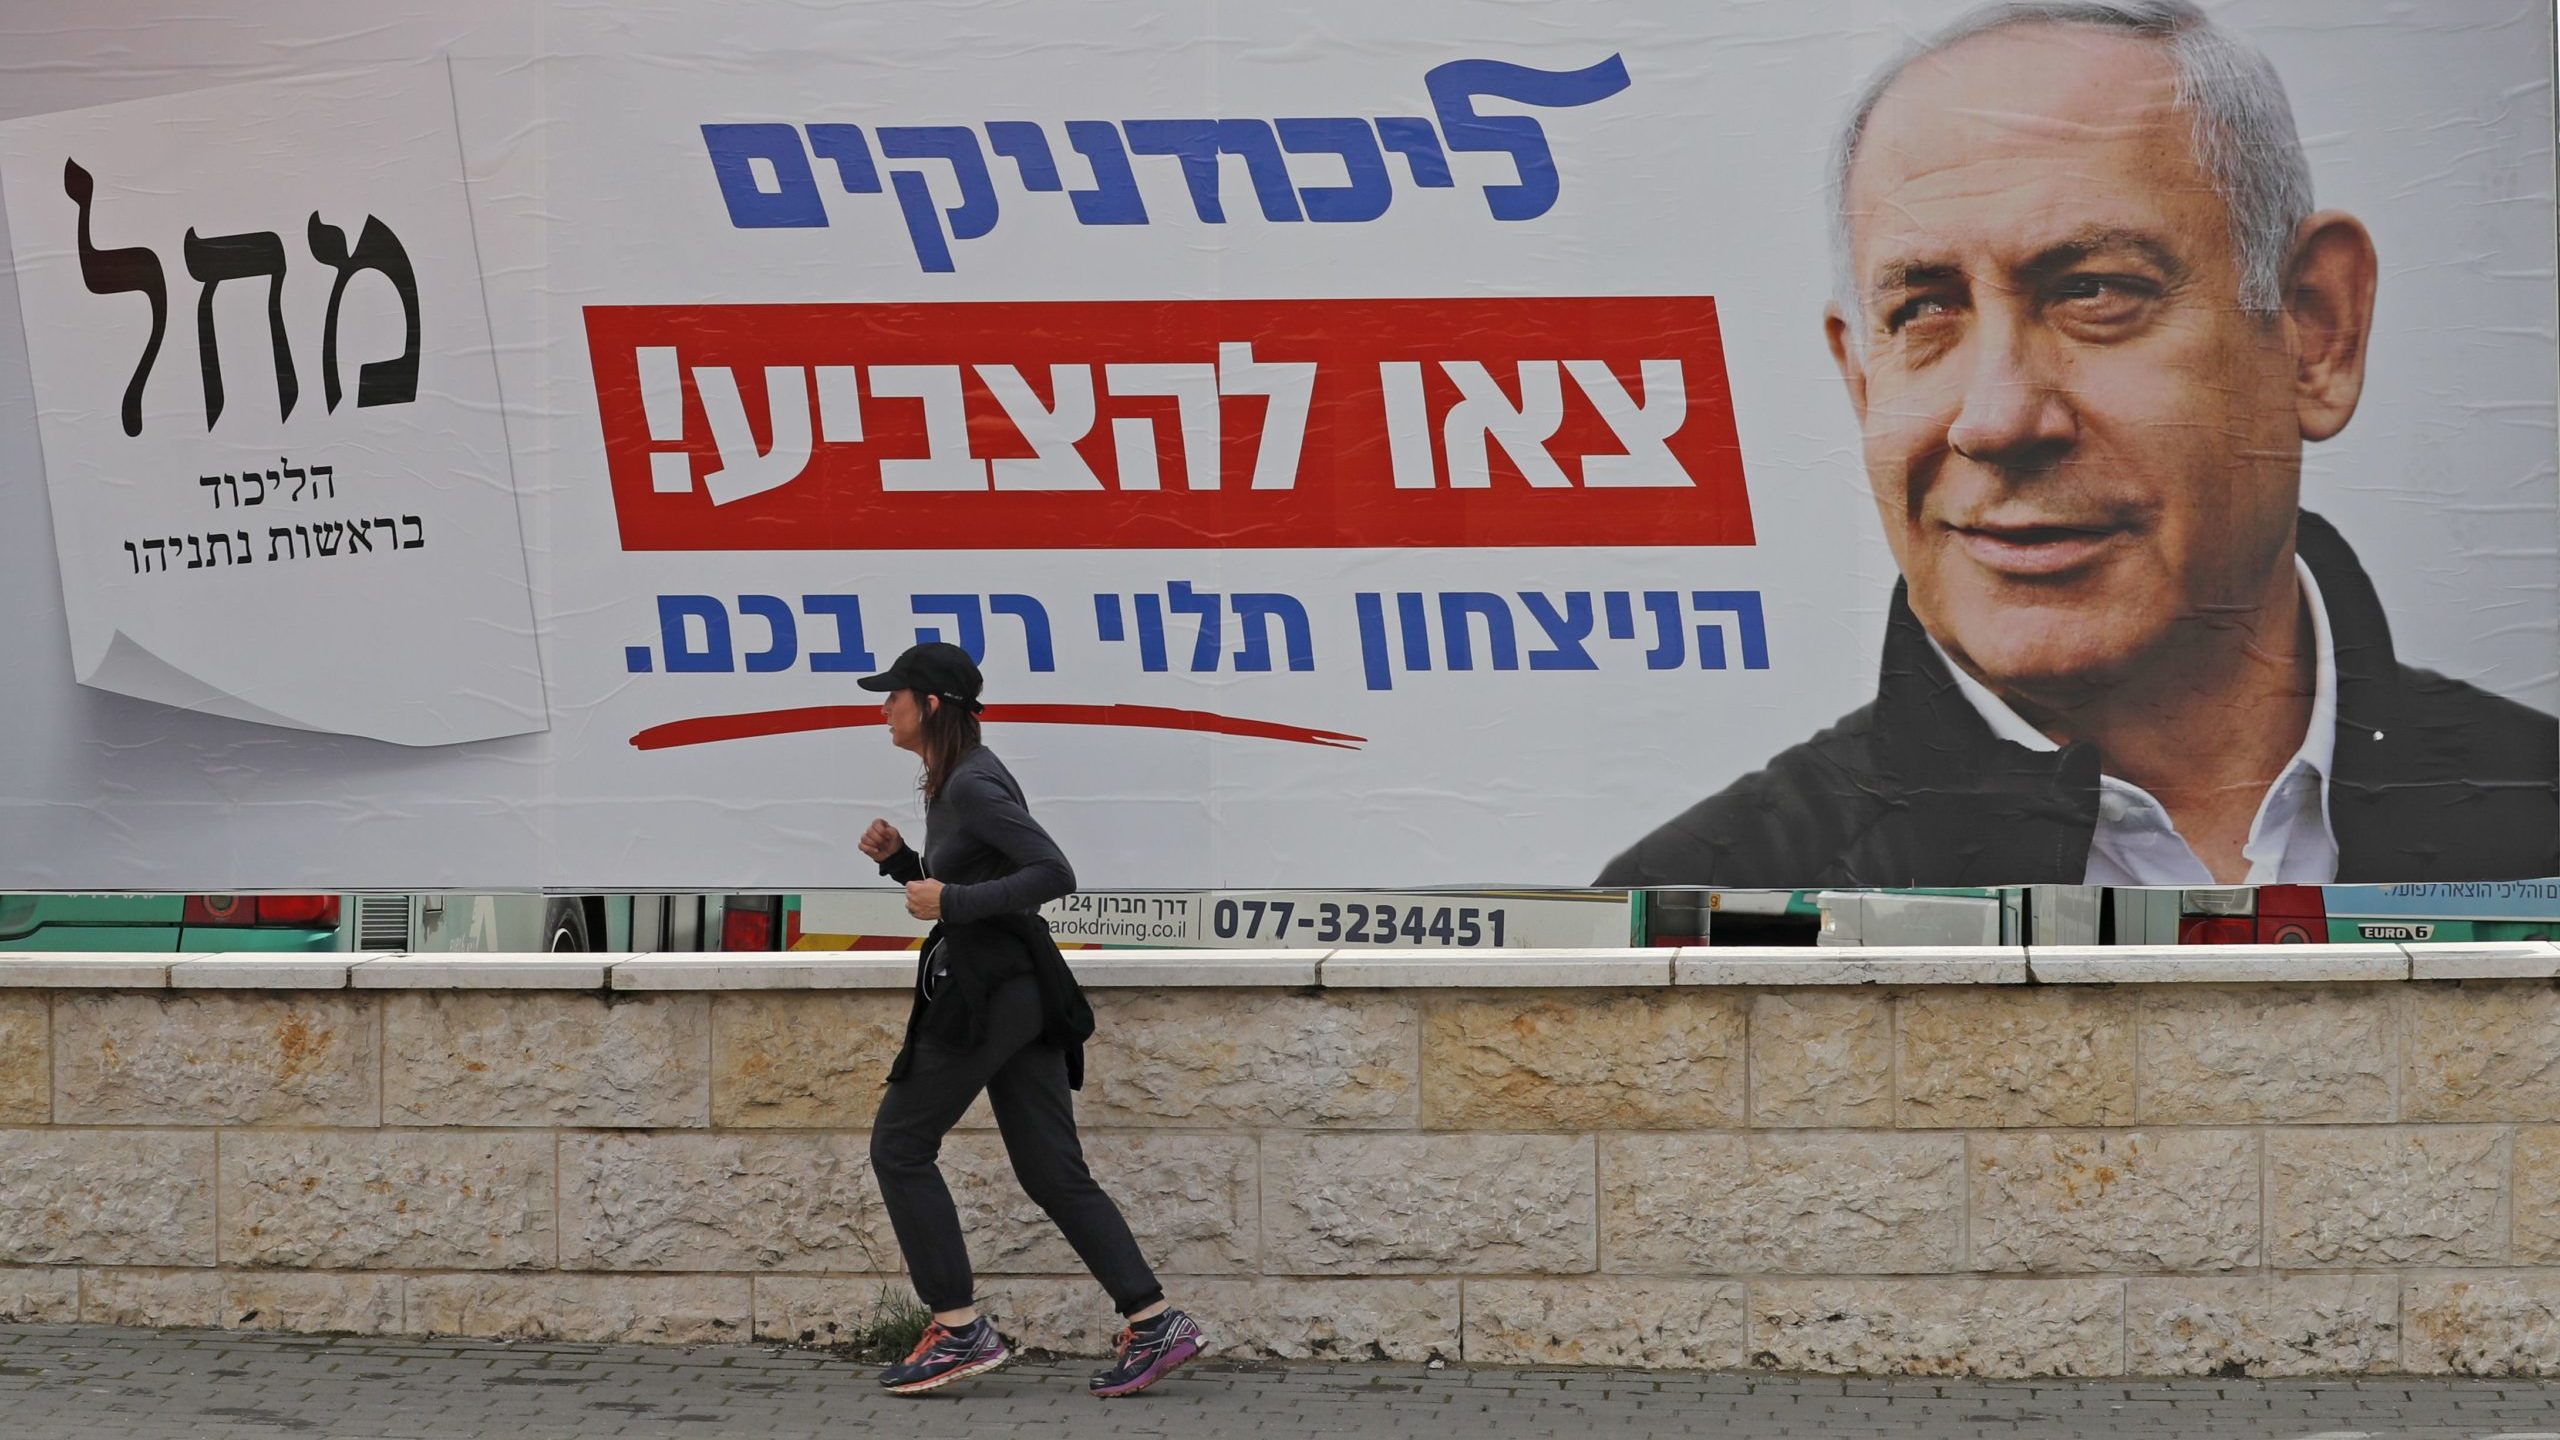 Israelis Go to the Polls – Yet Again – Amid Signs of Growing Apathy (AUDIO INTERVIEW)